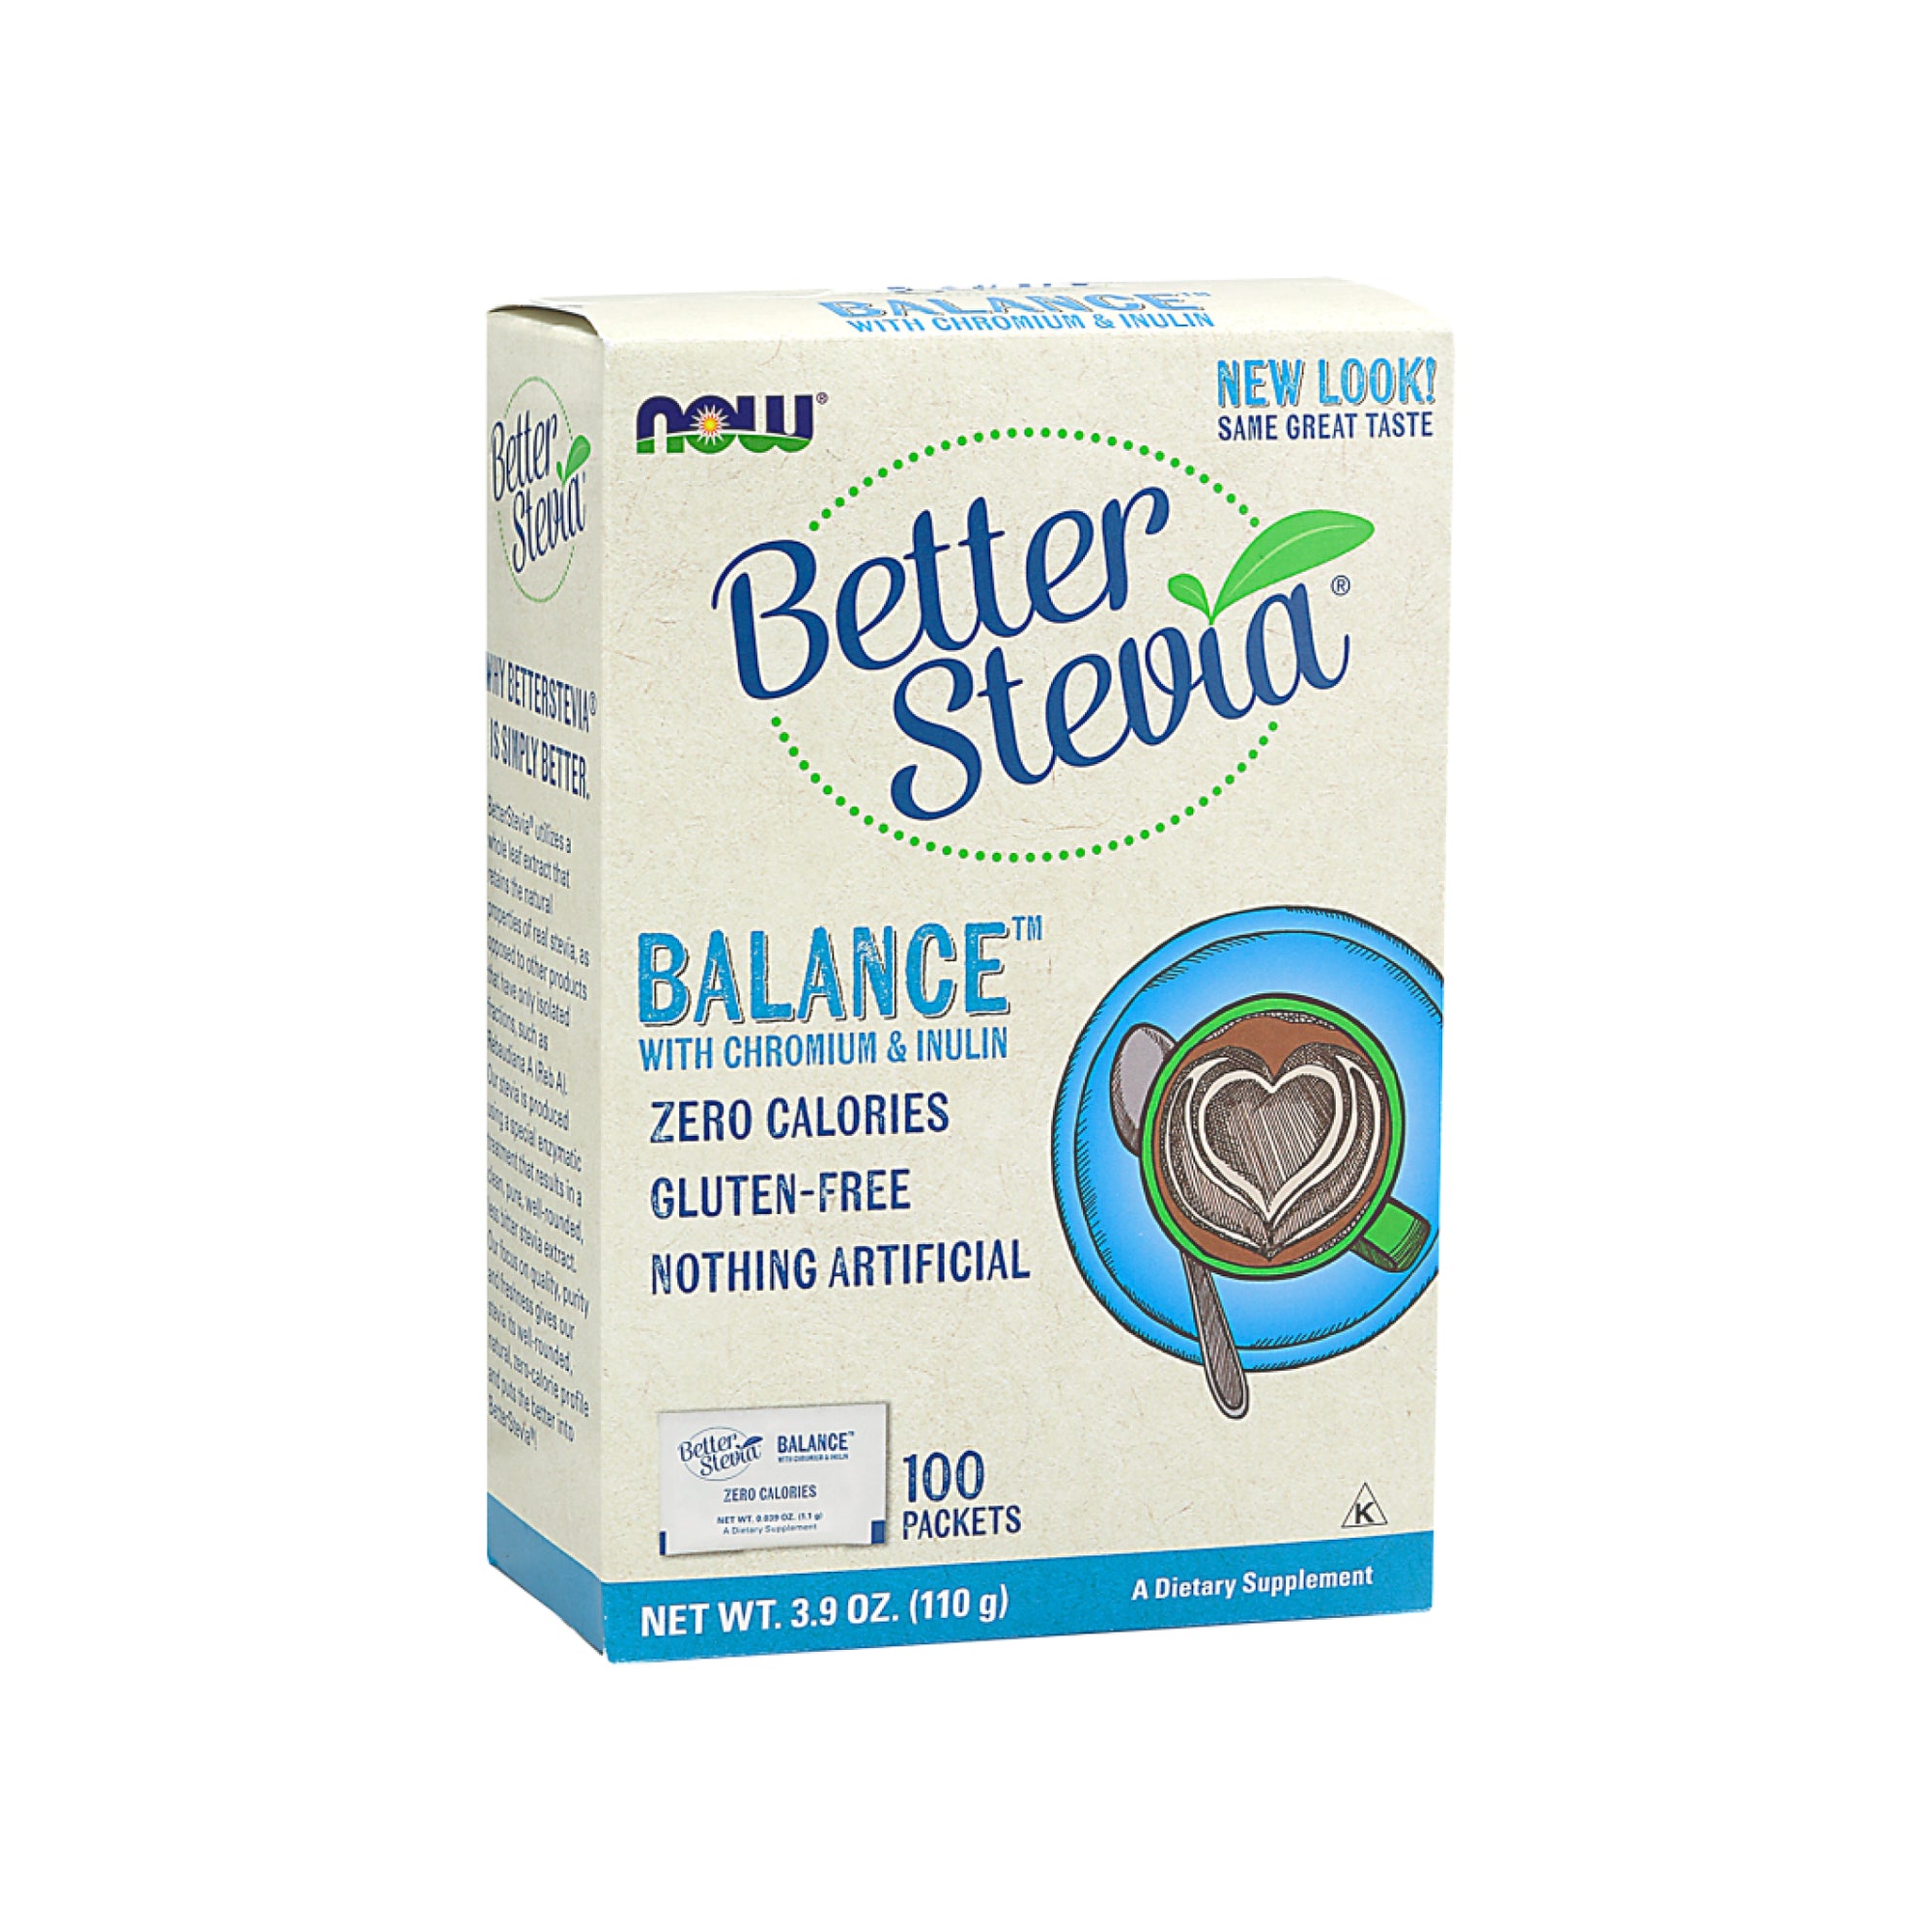 NOW BetterStevia Balance with Chromium & Inulin 100 Packets